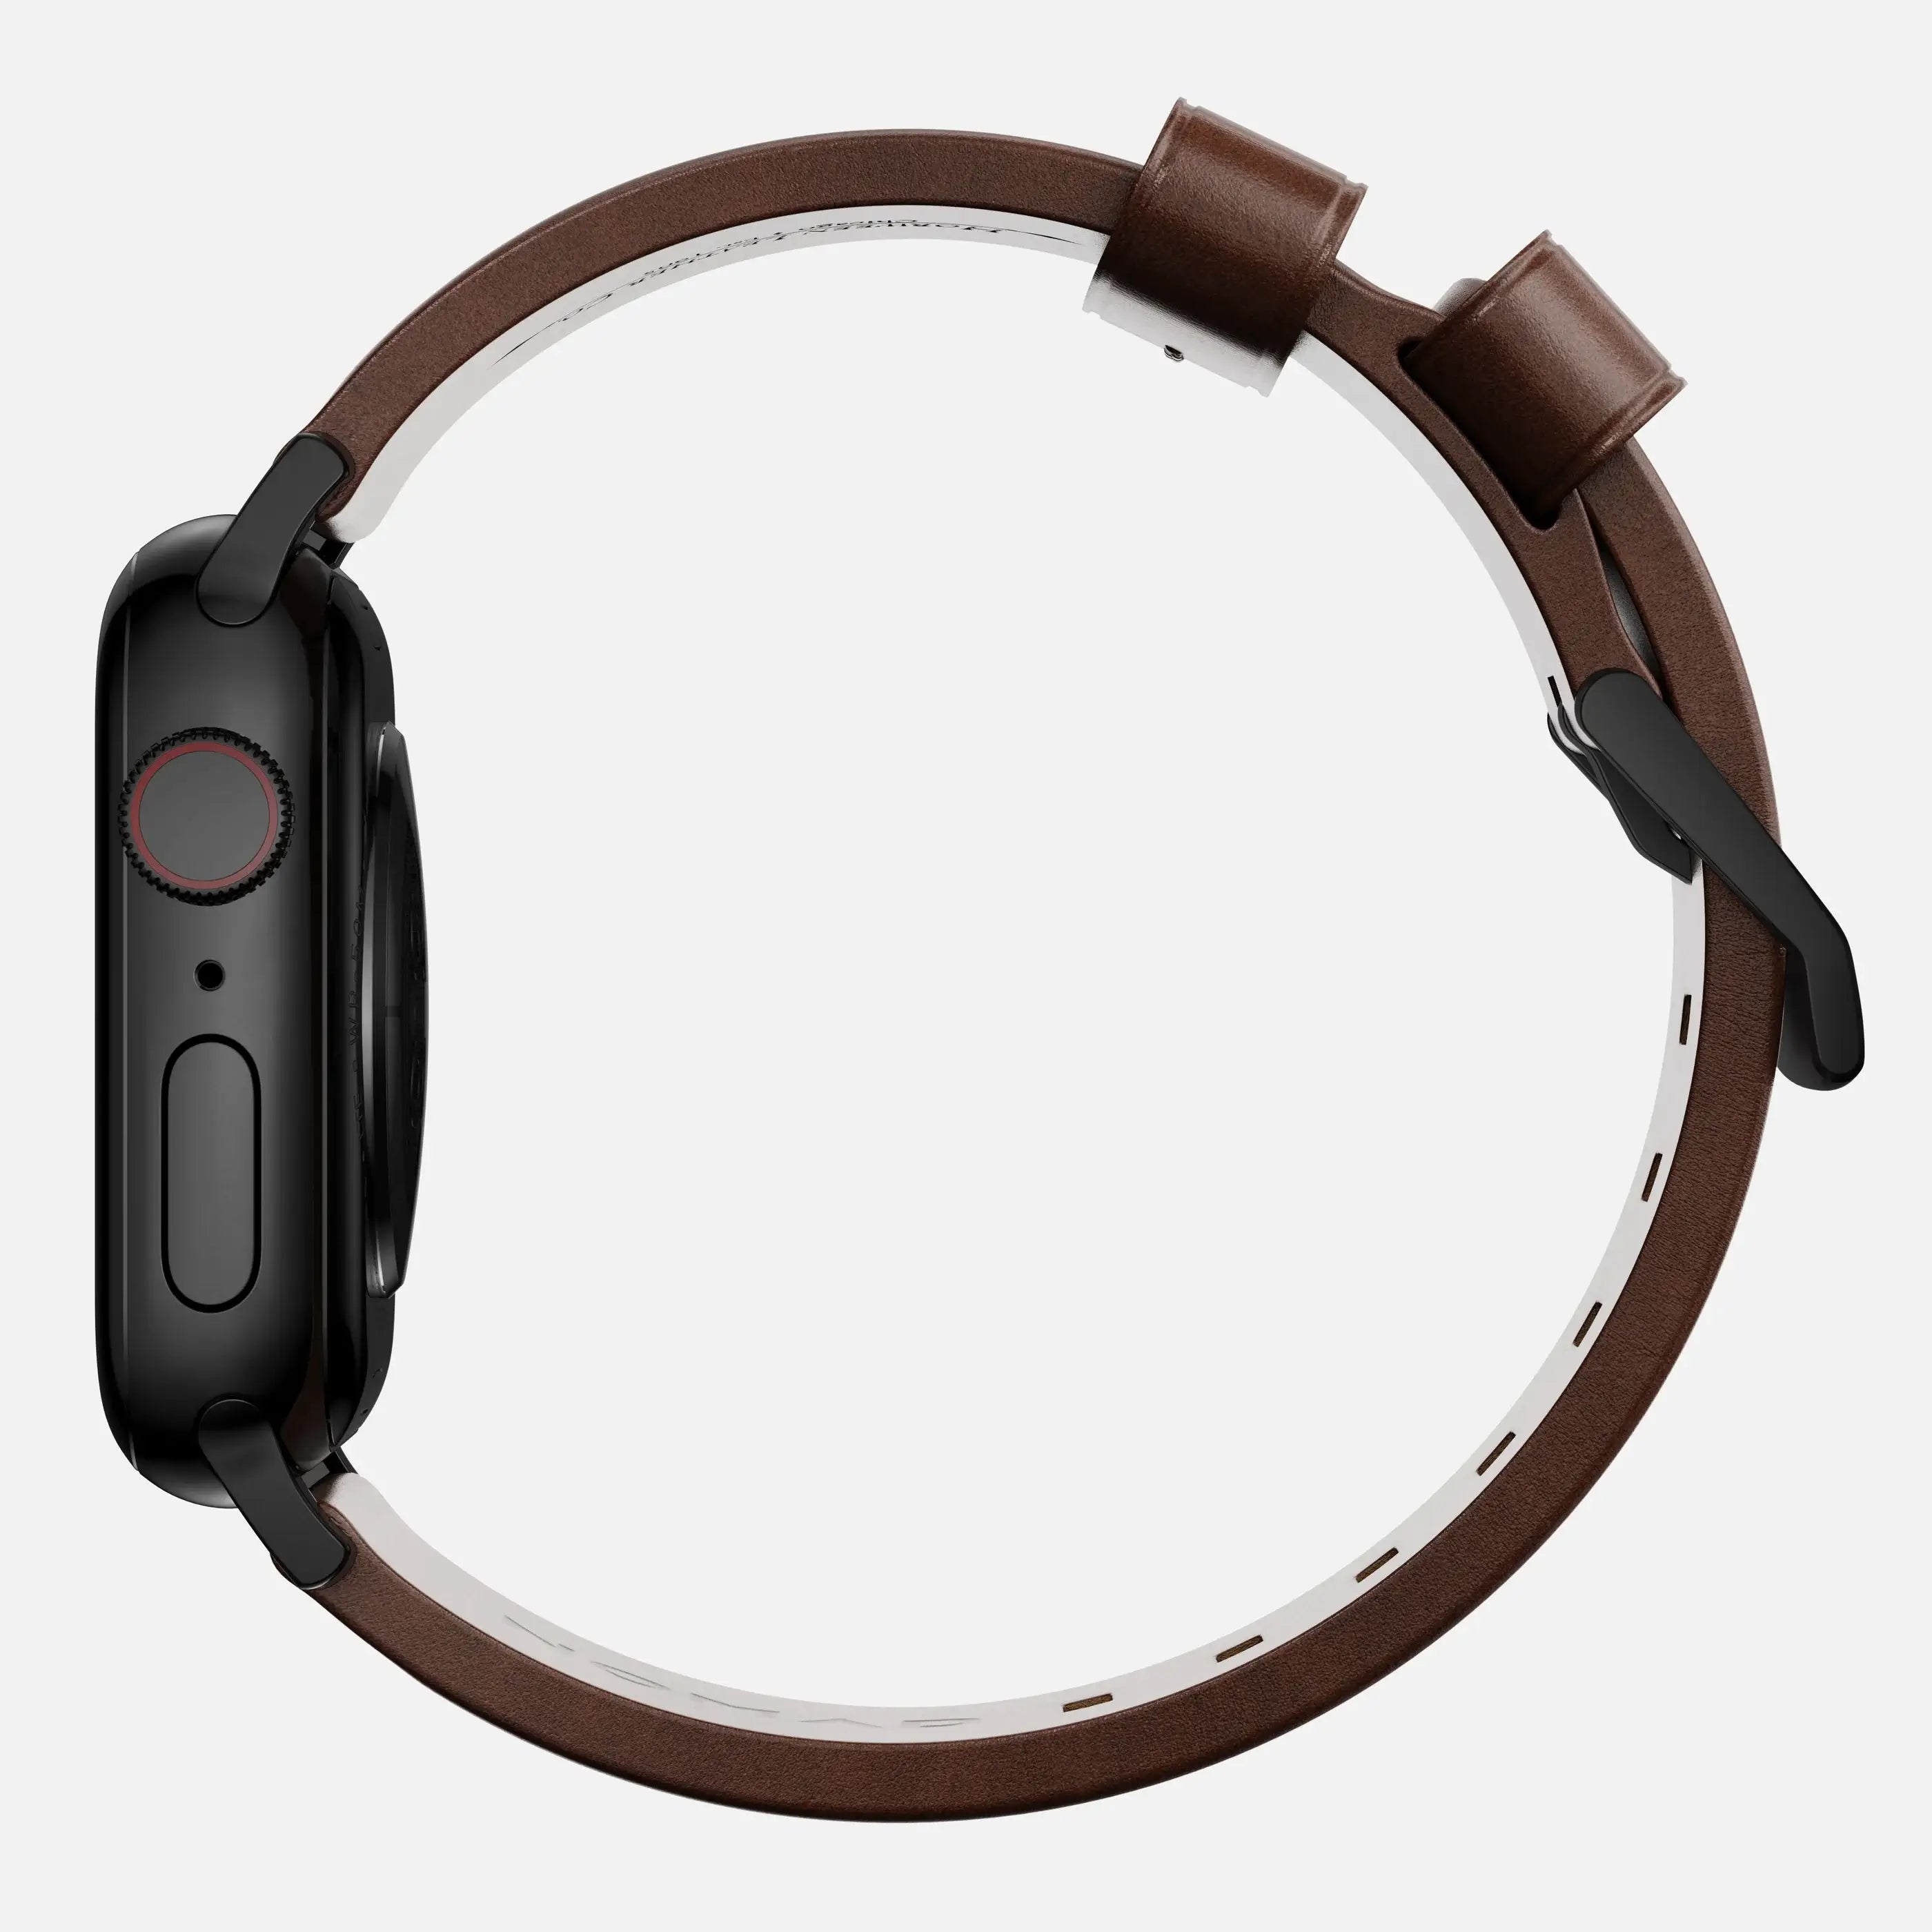 NOMAD Modern Band for Apple Watch by leather